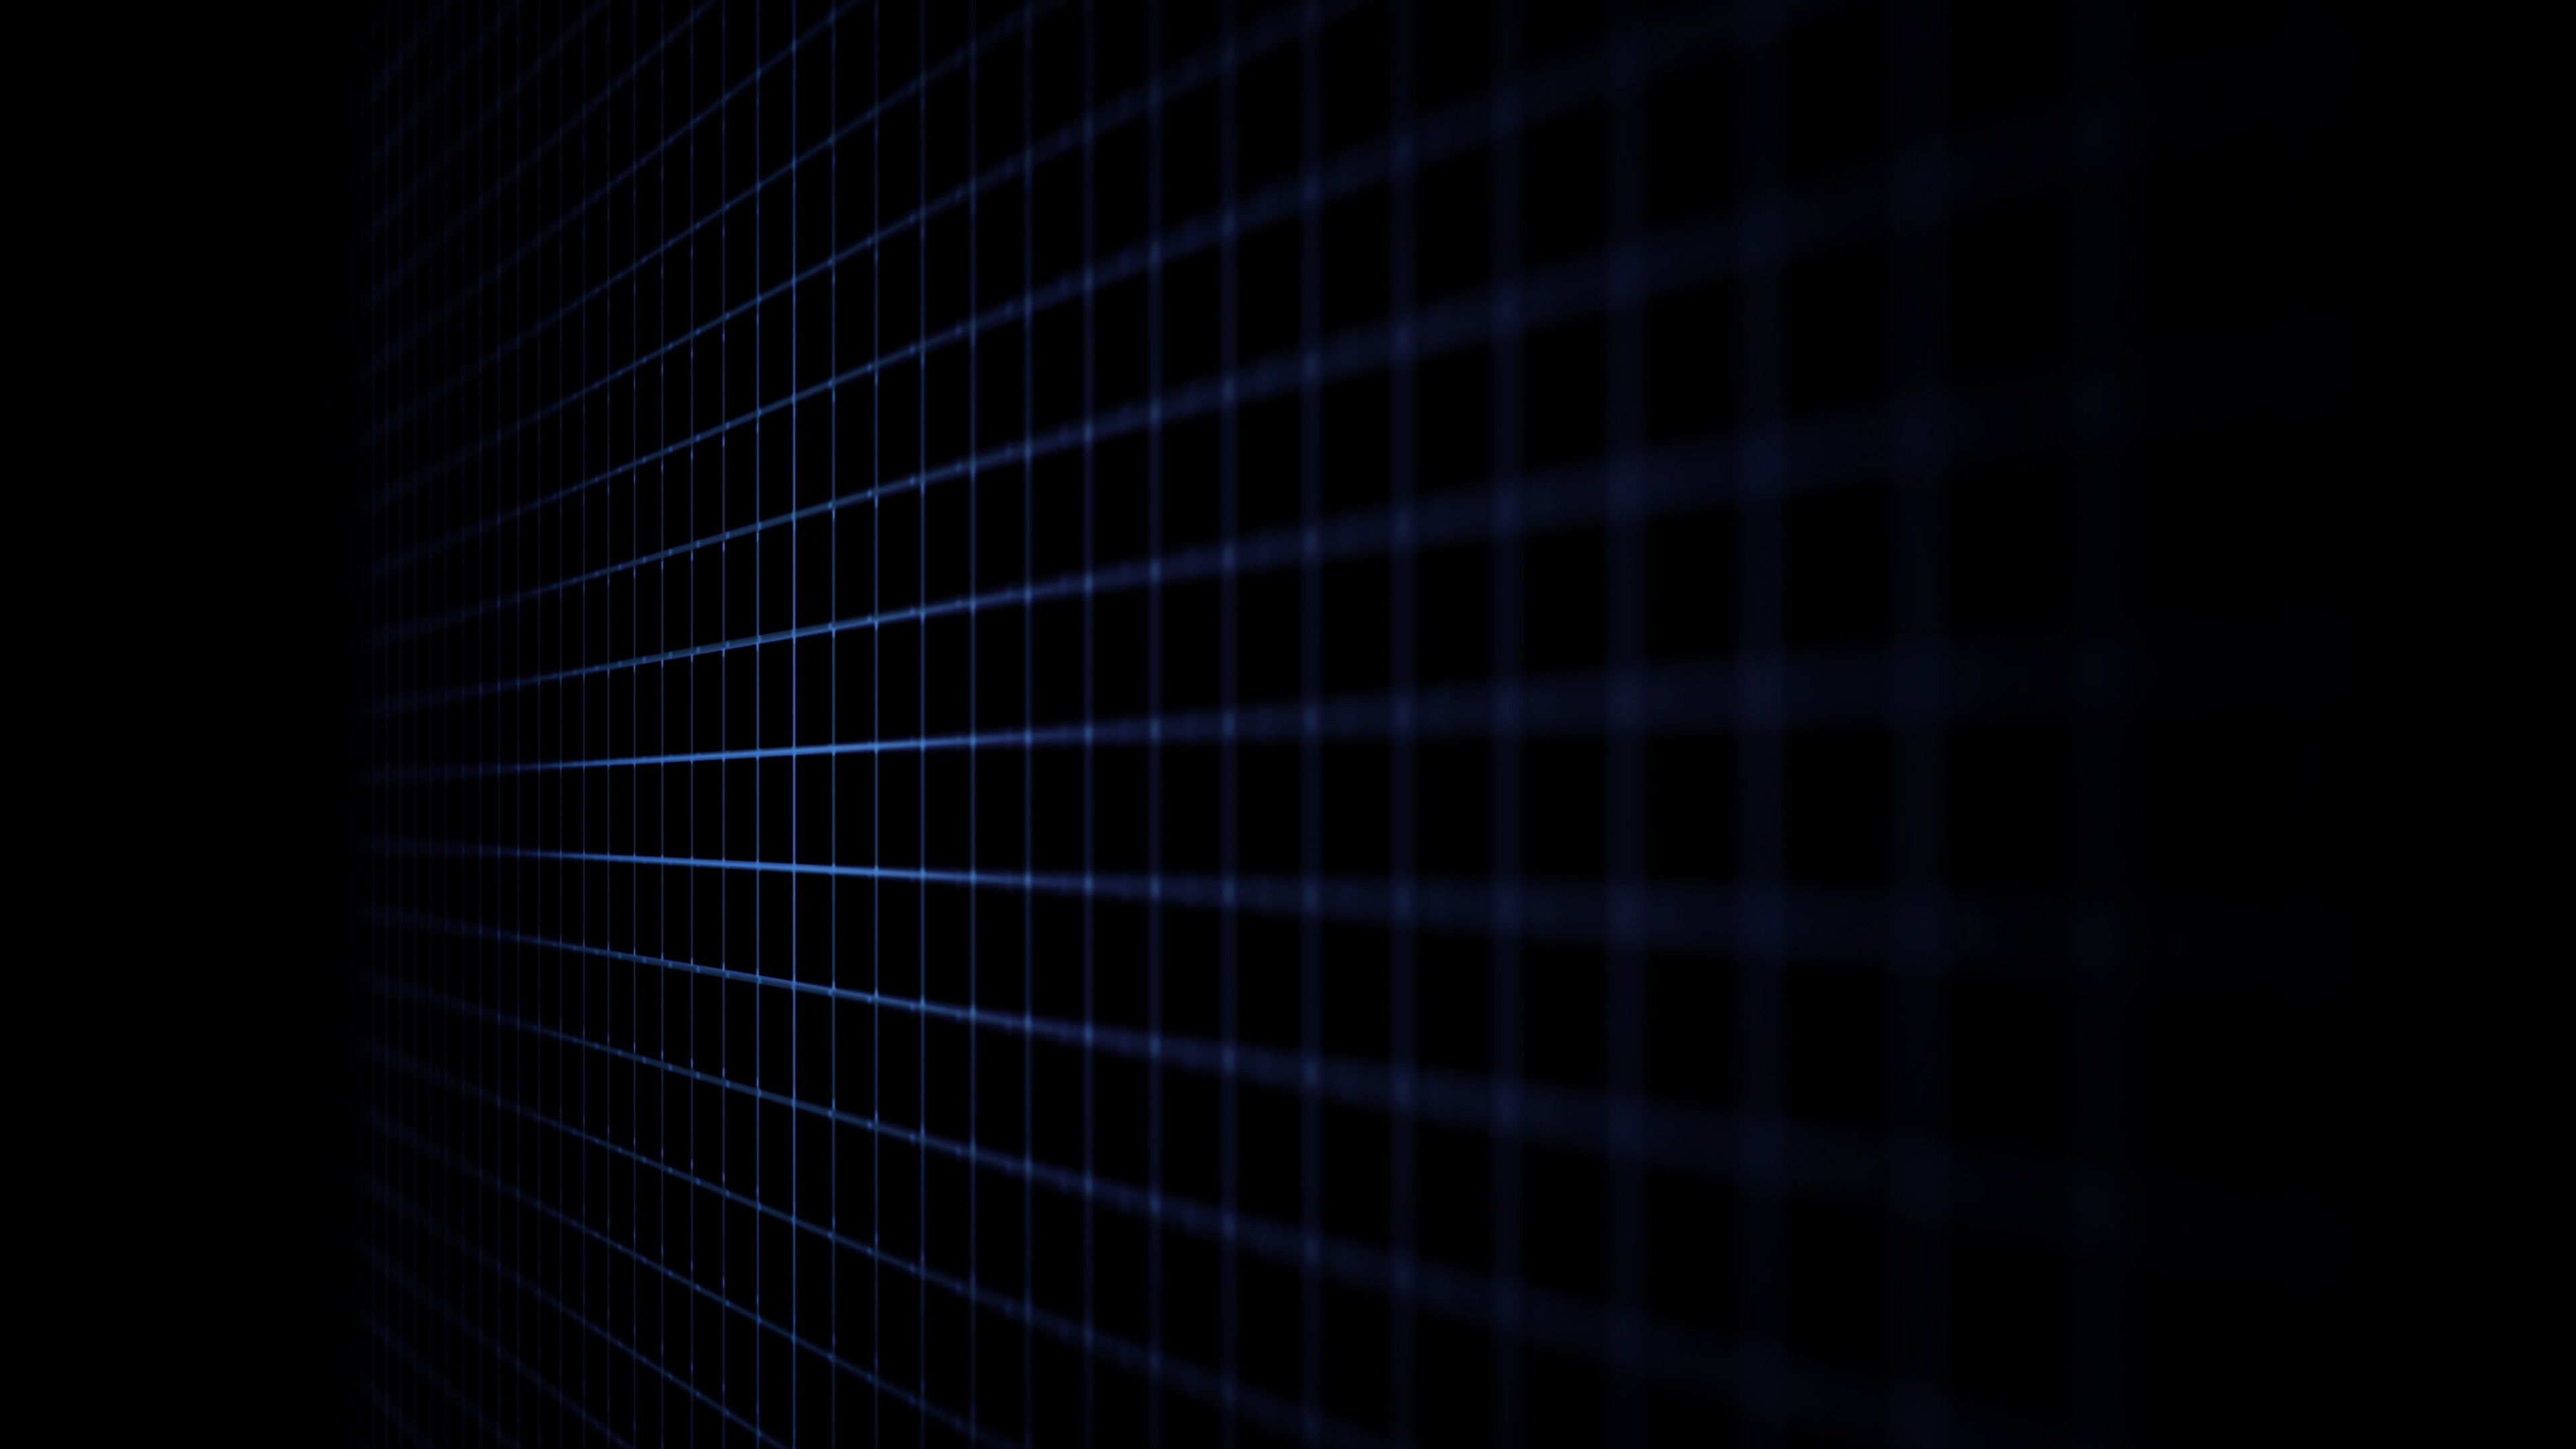 Awesome Abstract 4K Wallpaper. Black wallpaper, Cool black wallpaper, Dark wallpaper